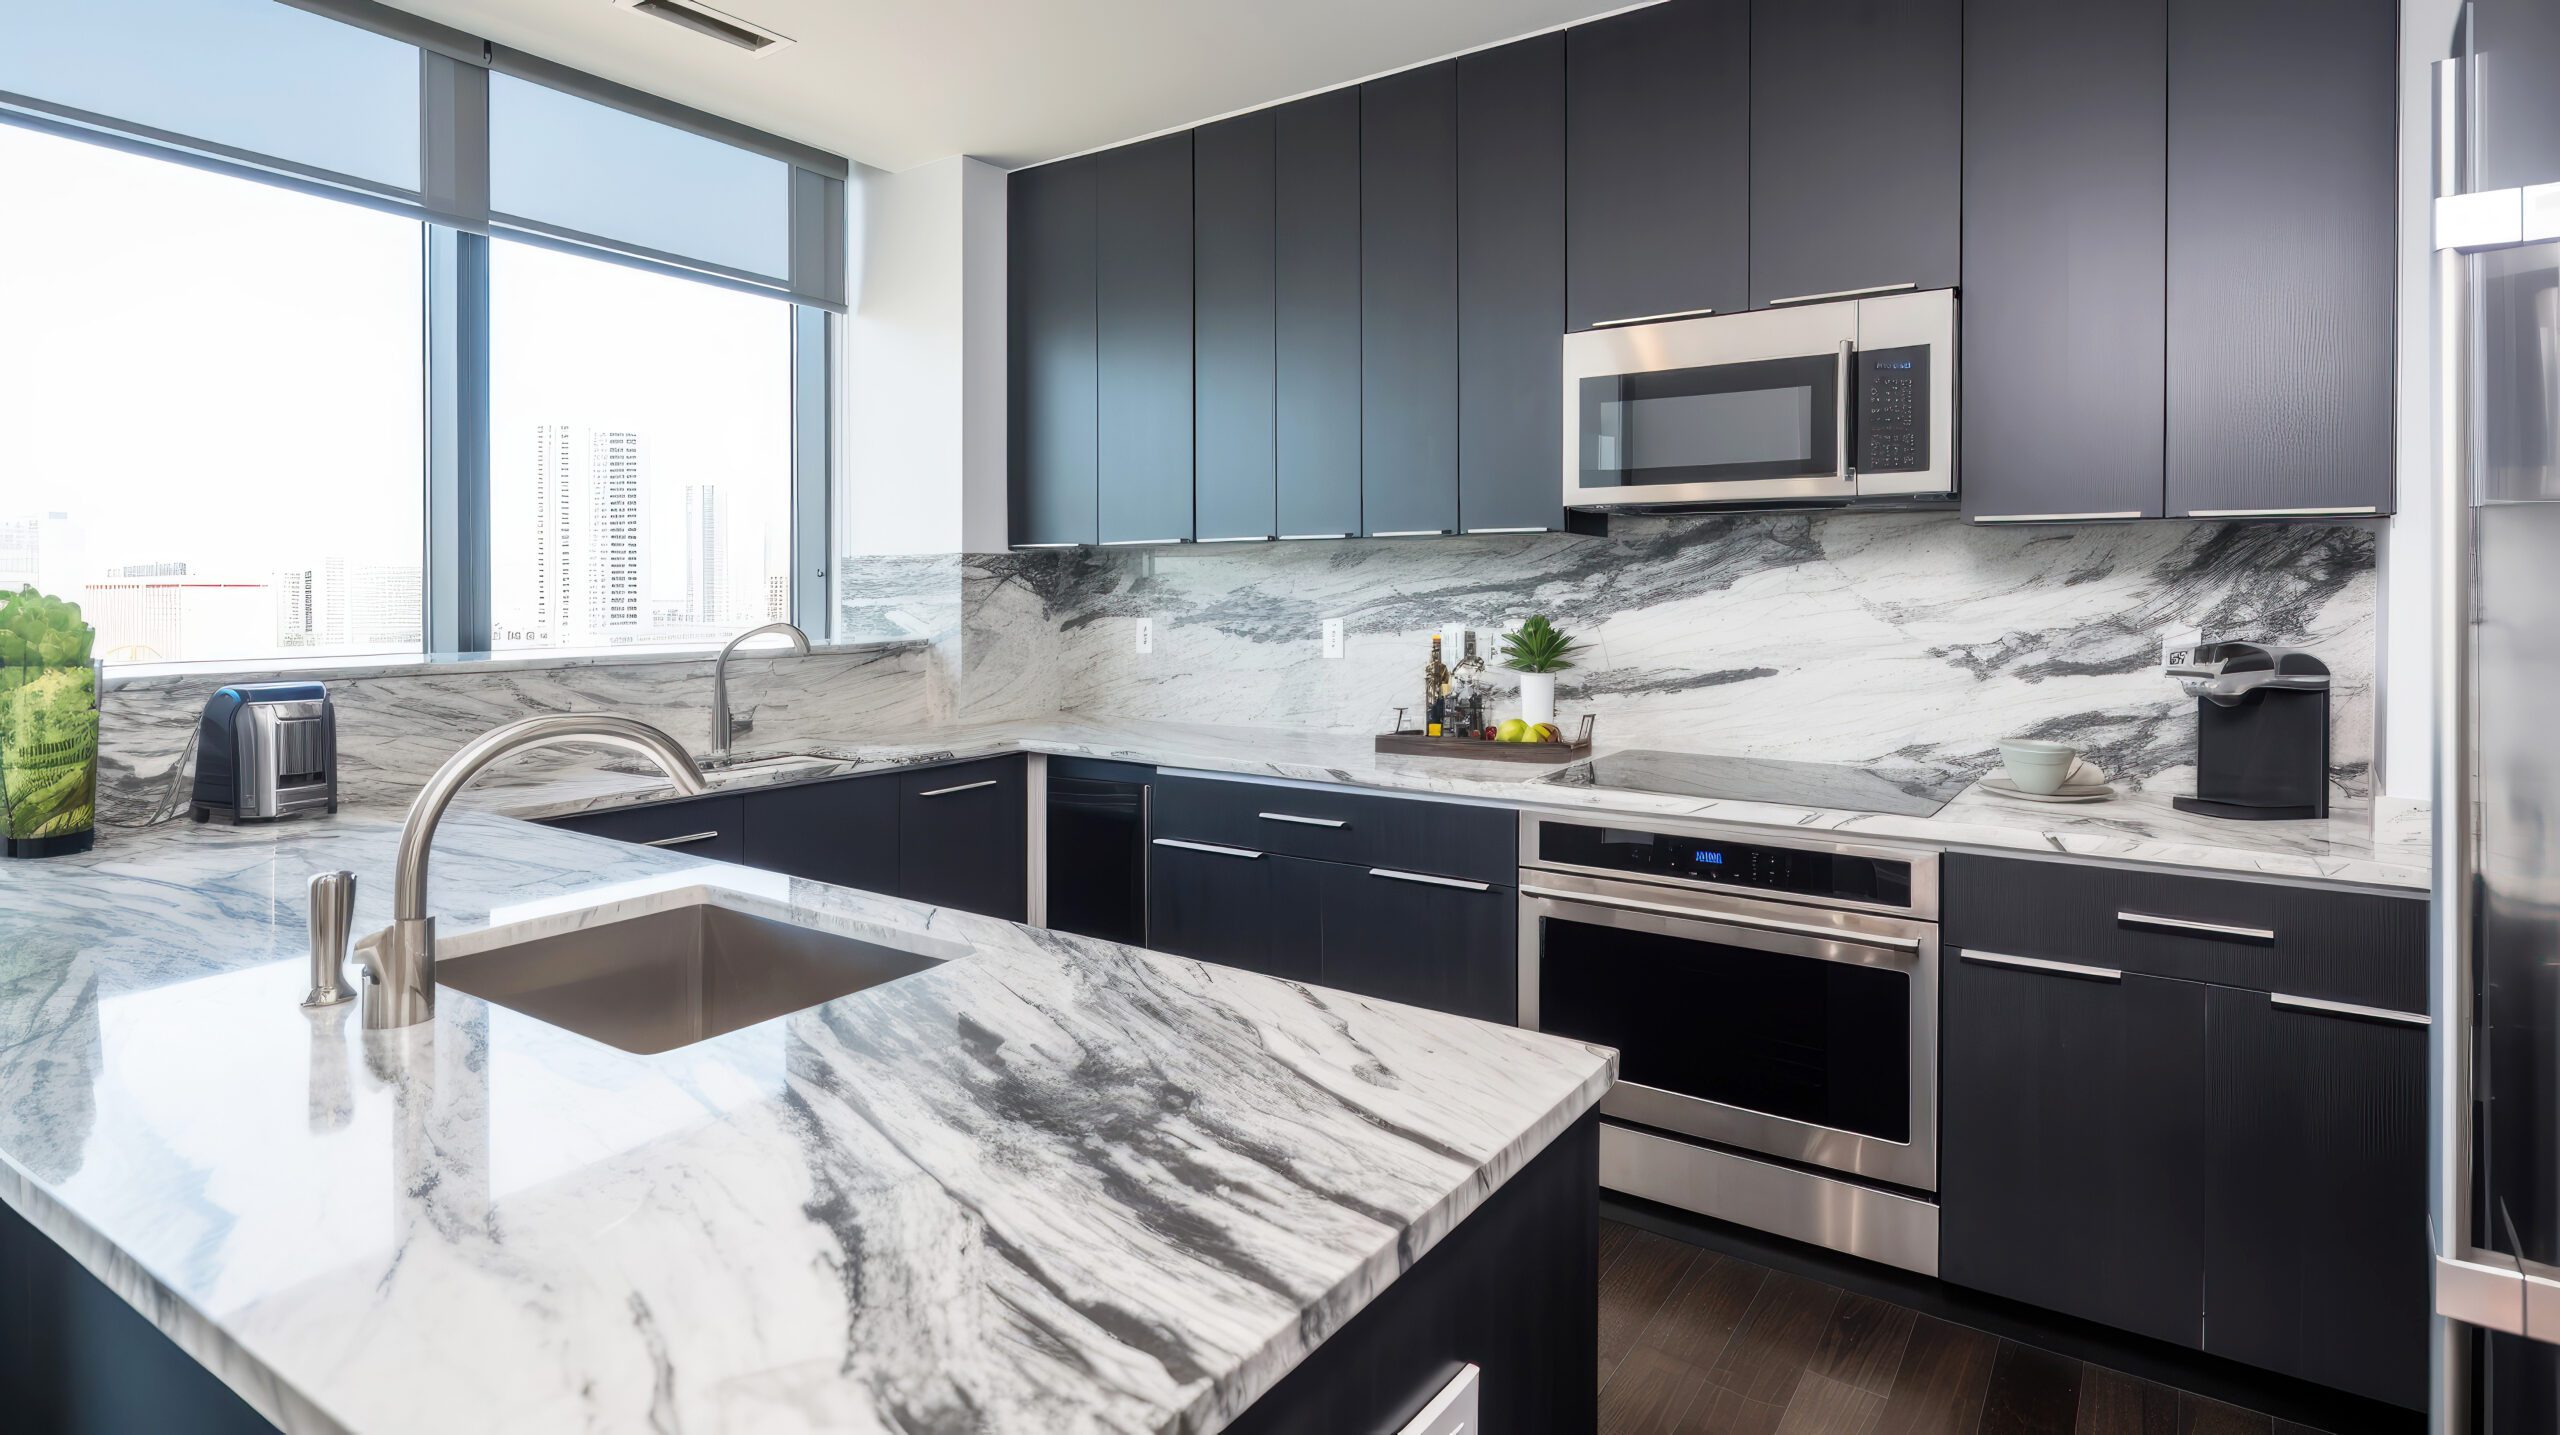 Contemporary kitchen design with stunning marble countertops pros and cons and sophisticated black cabinets